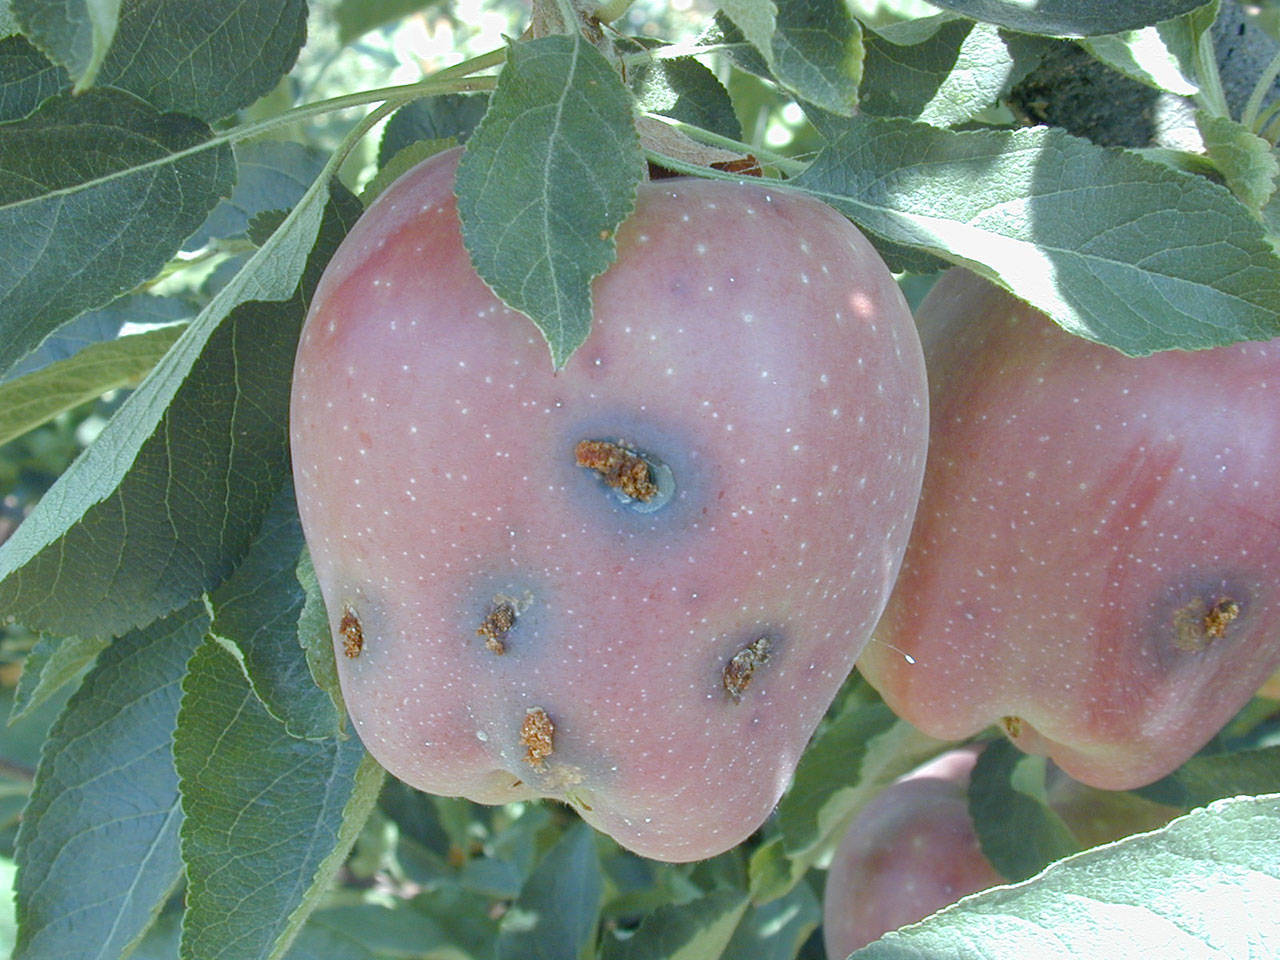 Entry holes on the surface of the apple marked by reddish brown granular material present a telltale sign of codling moth. (Jay Brunner)